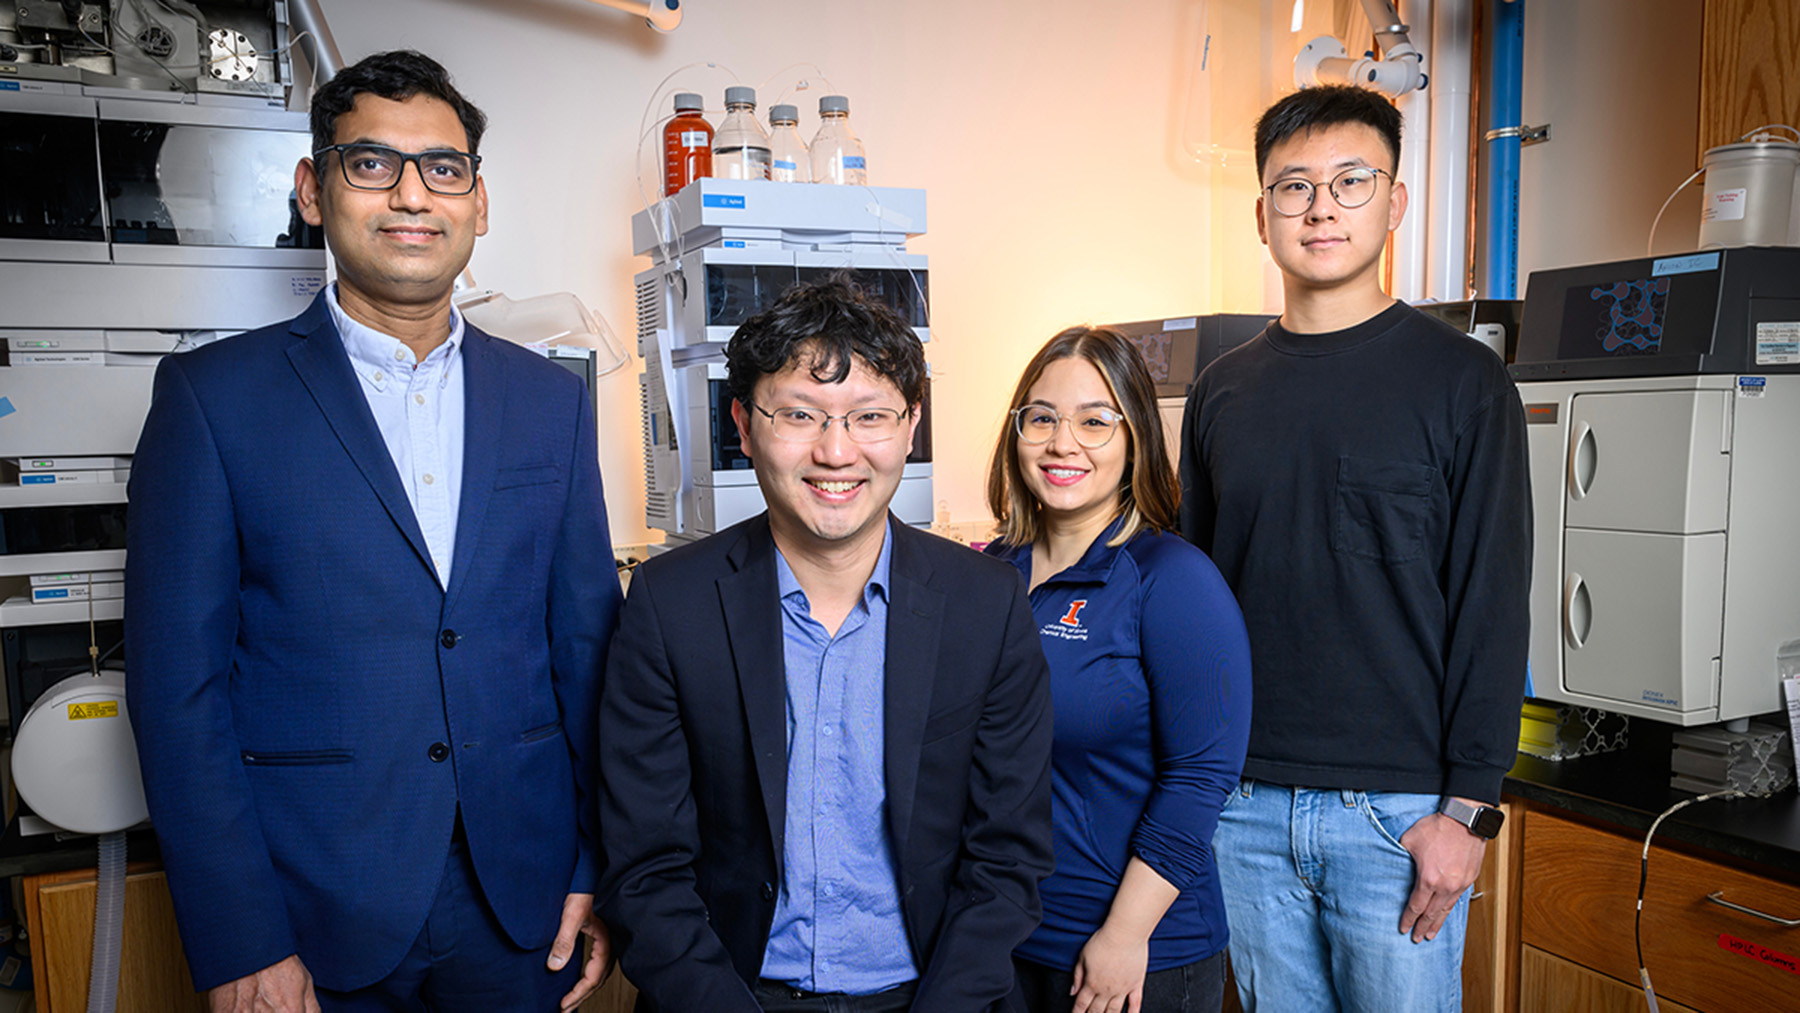 Illinois researchers including professor Diwakar Shukla, left, professor Xiao Su, Anaira Román Santiago and Song Yin collaborated on a study that verifies that electrochemistry – rather than filtration and harmful solvents – can remove short-chain PFAS from the environment and municipal water supplies. Photo by Fred Zwicky